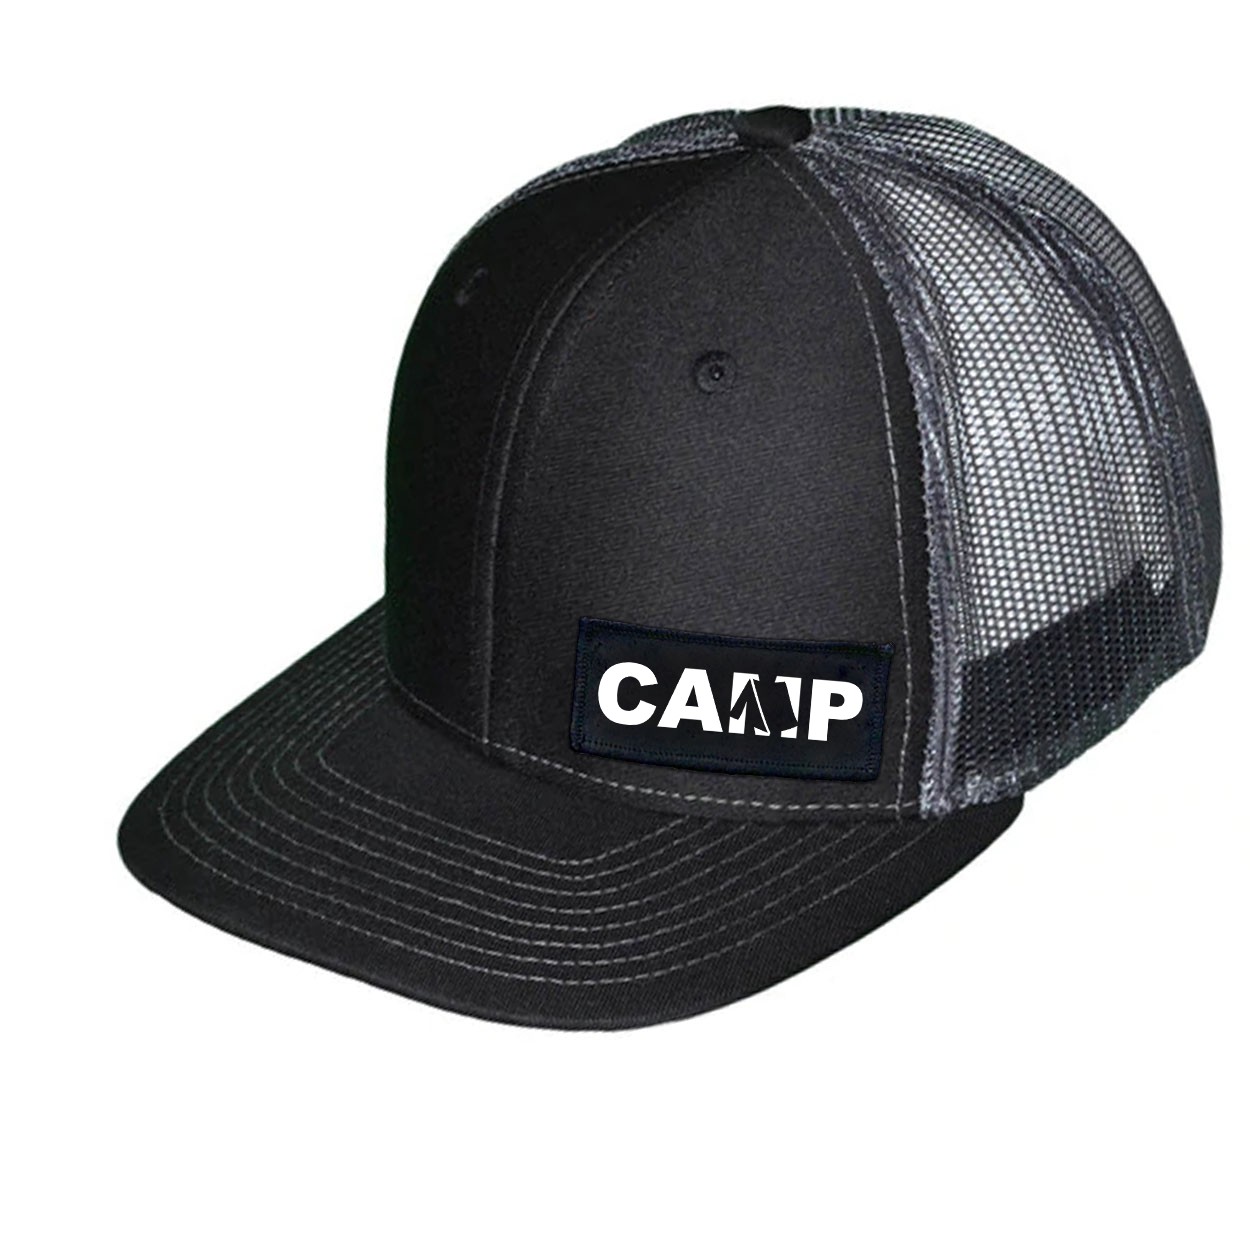 Camp Tent Logo Night Out Woven Patch Snapback Trucker Hat Black/Charcoal (White Logo)